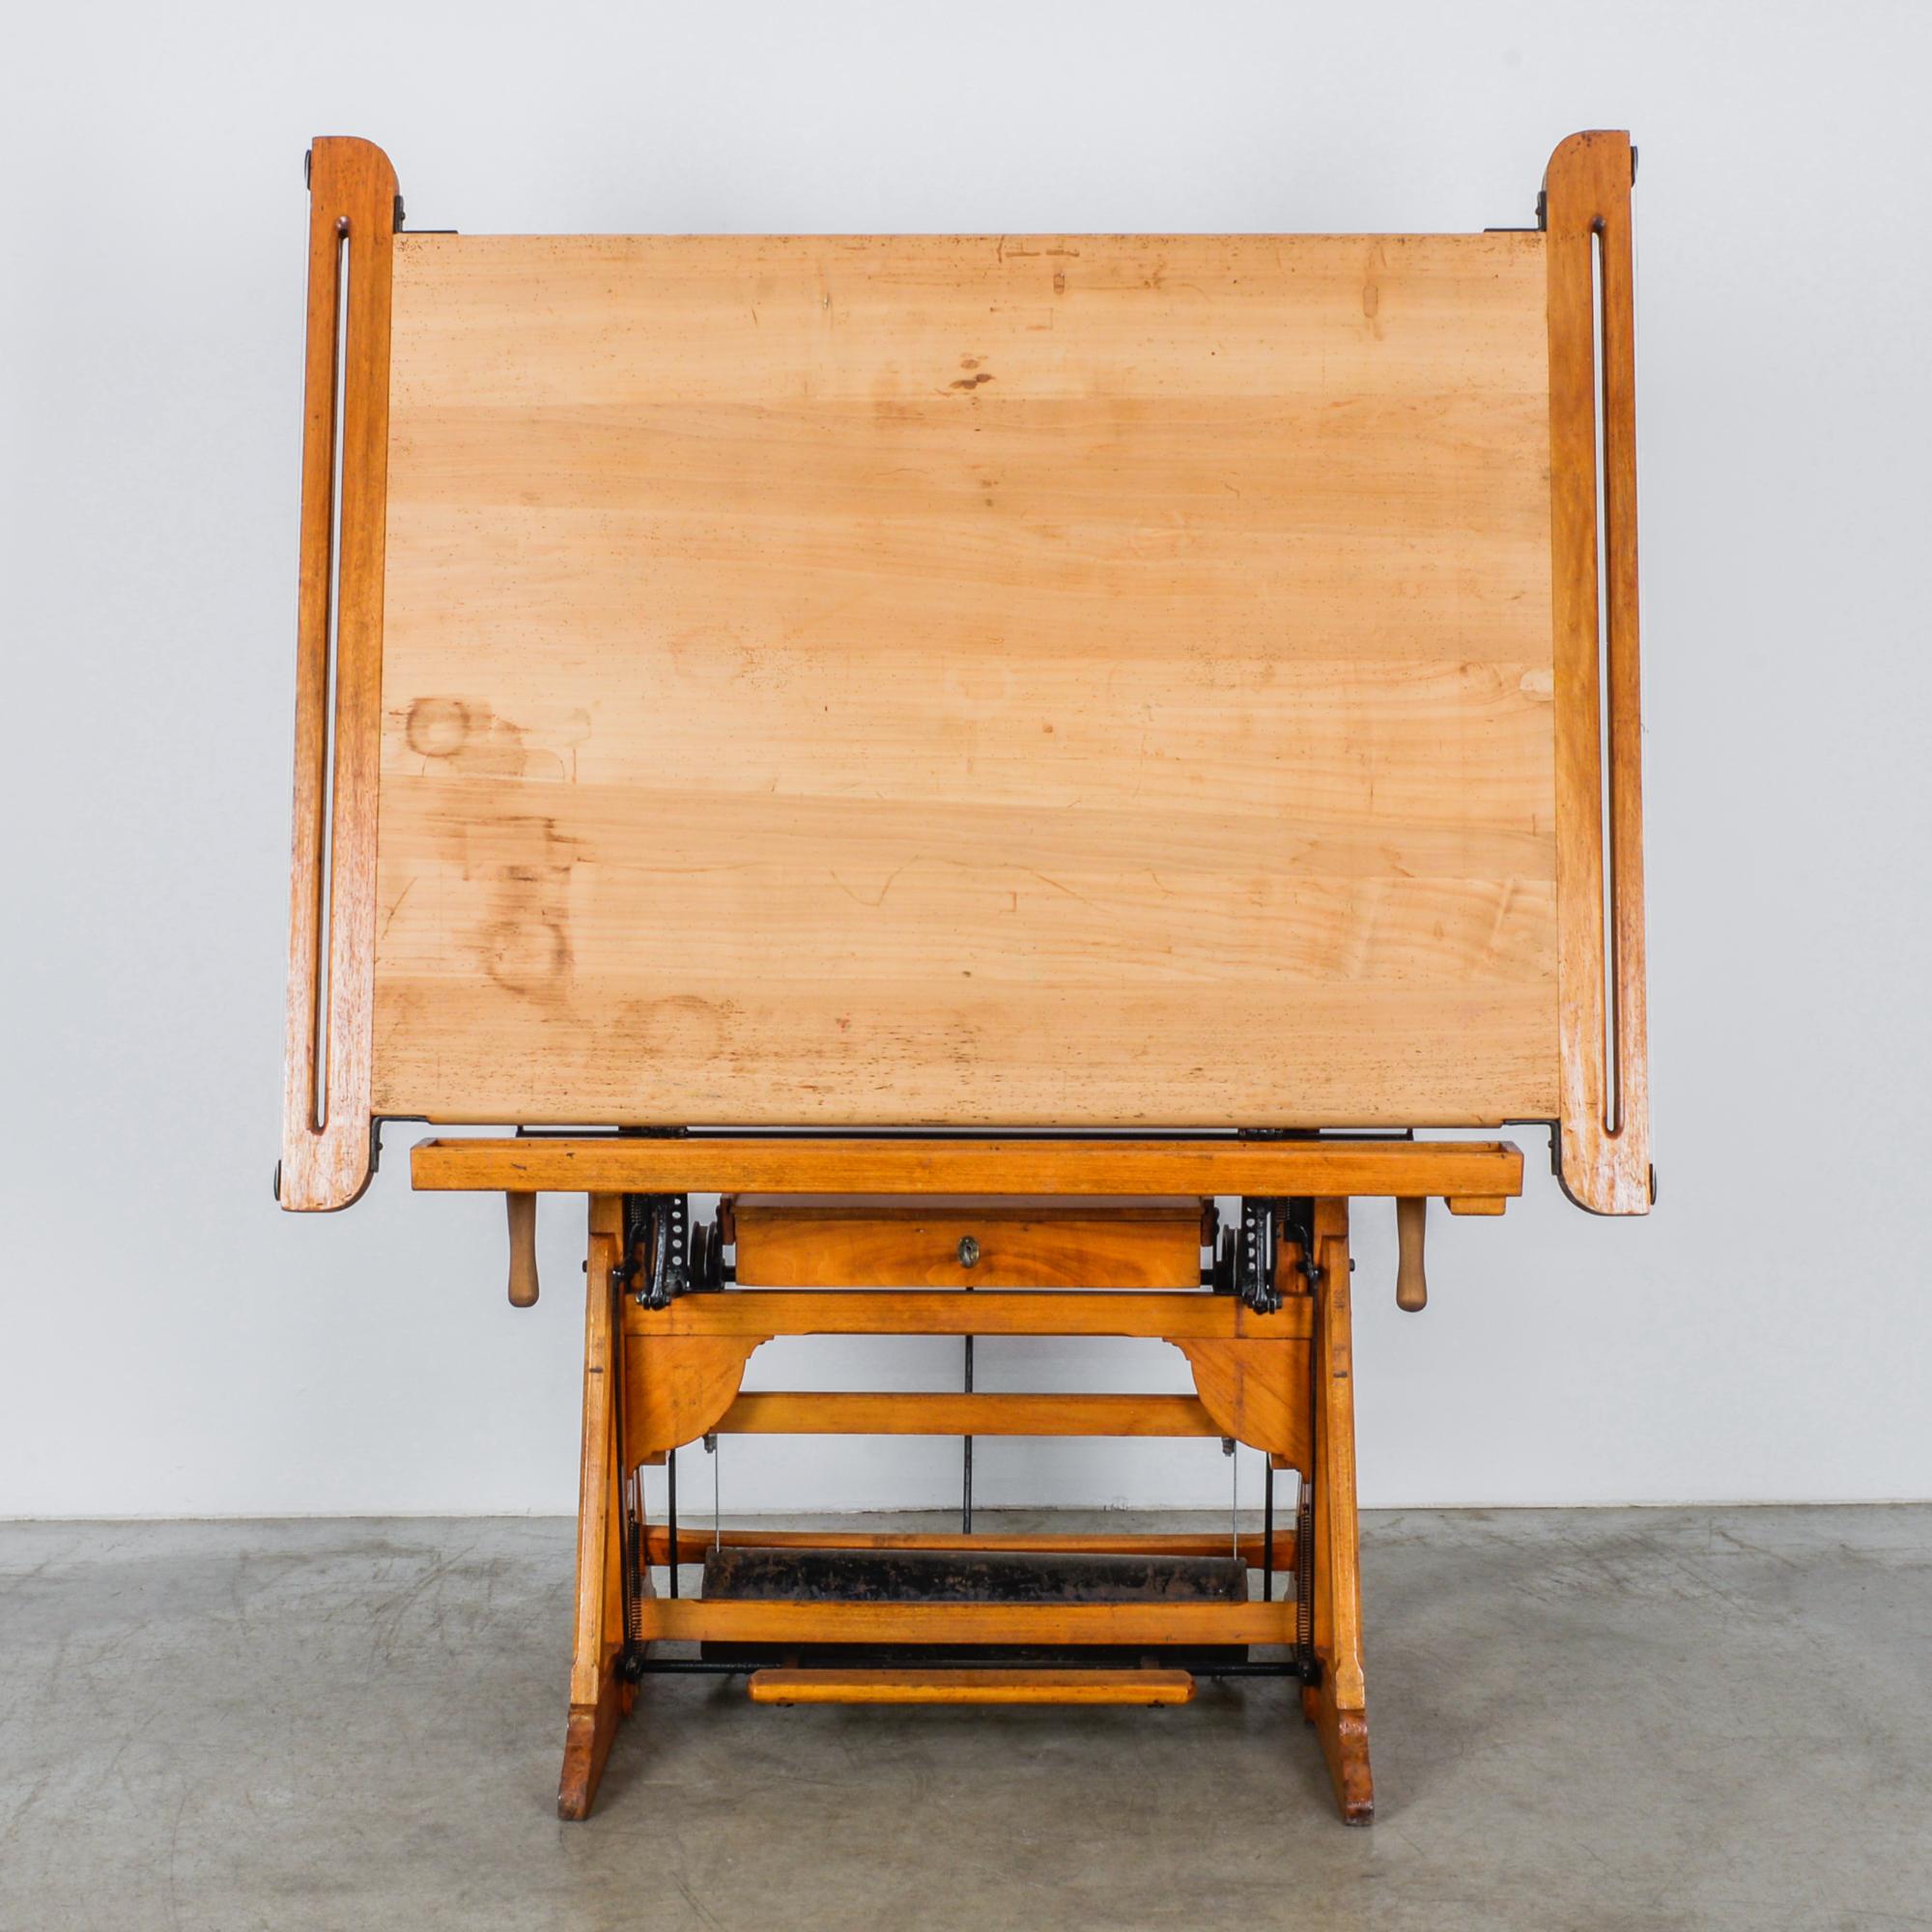 A wooden drawing table from Belgium, circa 1950. An intricate mechanical construction allows the broad tabletop to be raised, lowered and angled to a horizontal or vertical position, allowing the draftsman to work sitting or standing up. A-frame